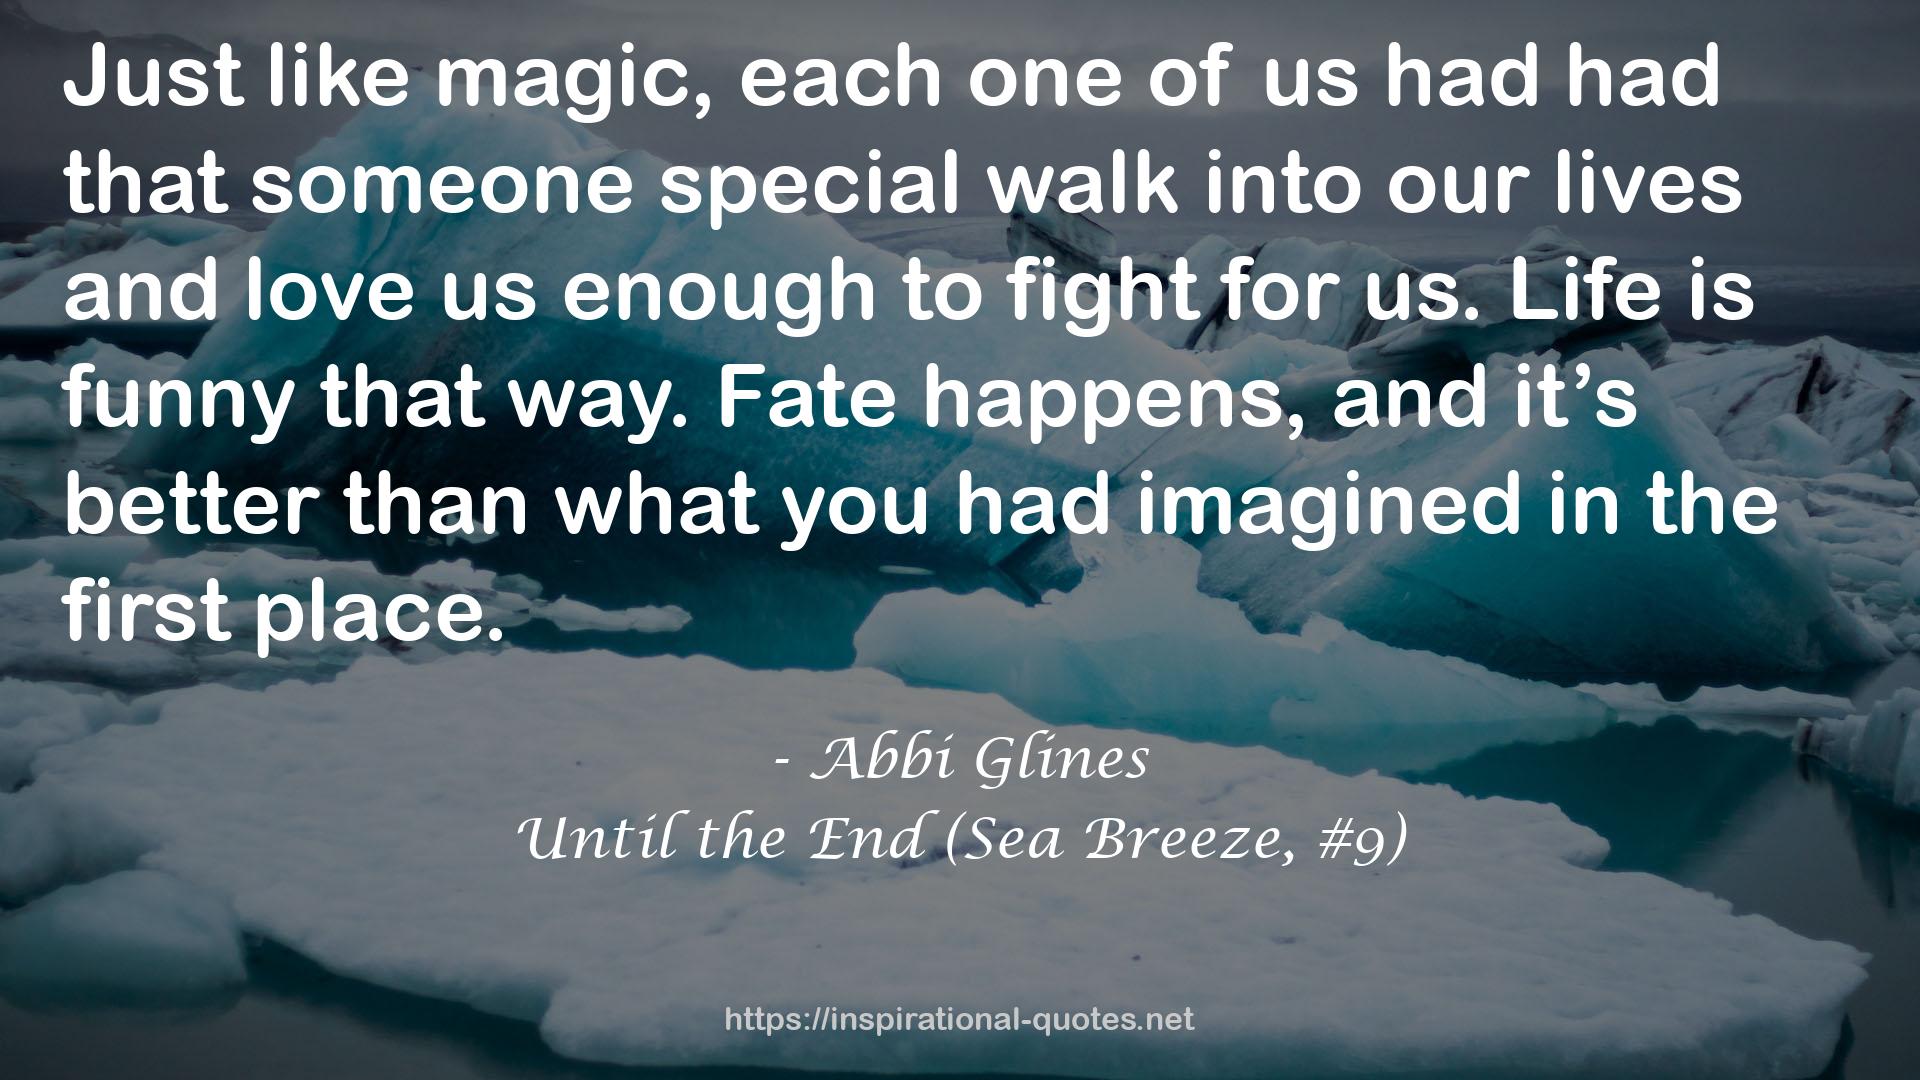 Until the End (Sea Breeze, #9) QUOTES